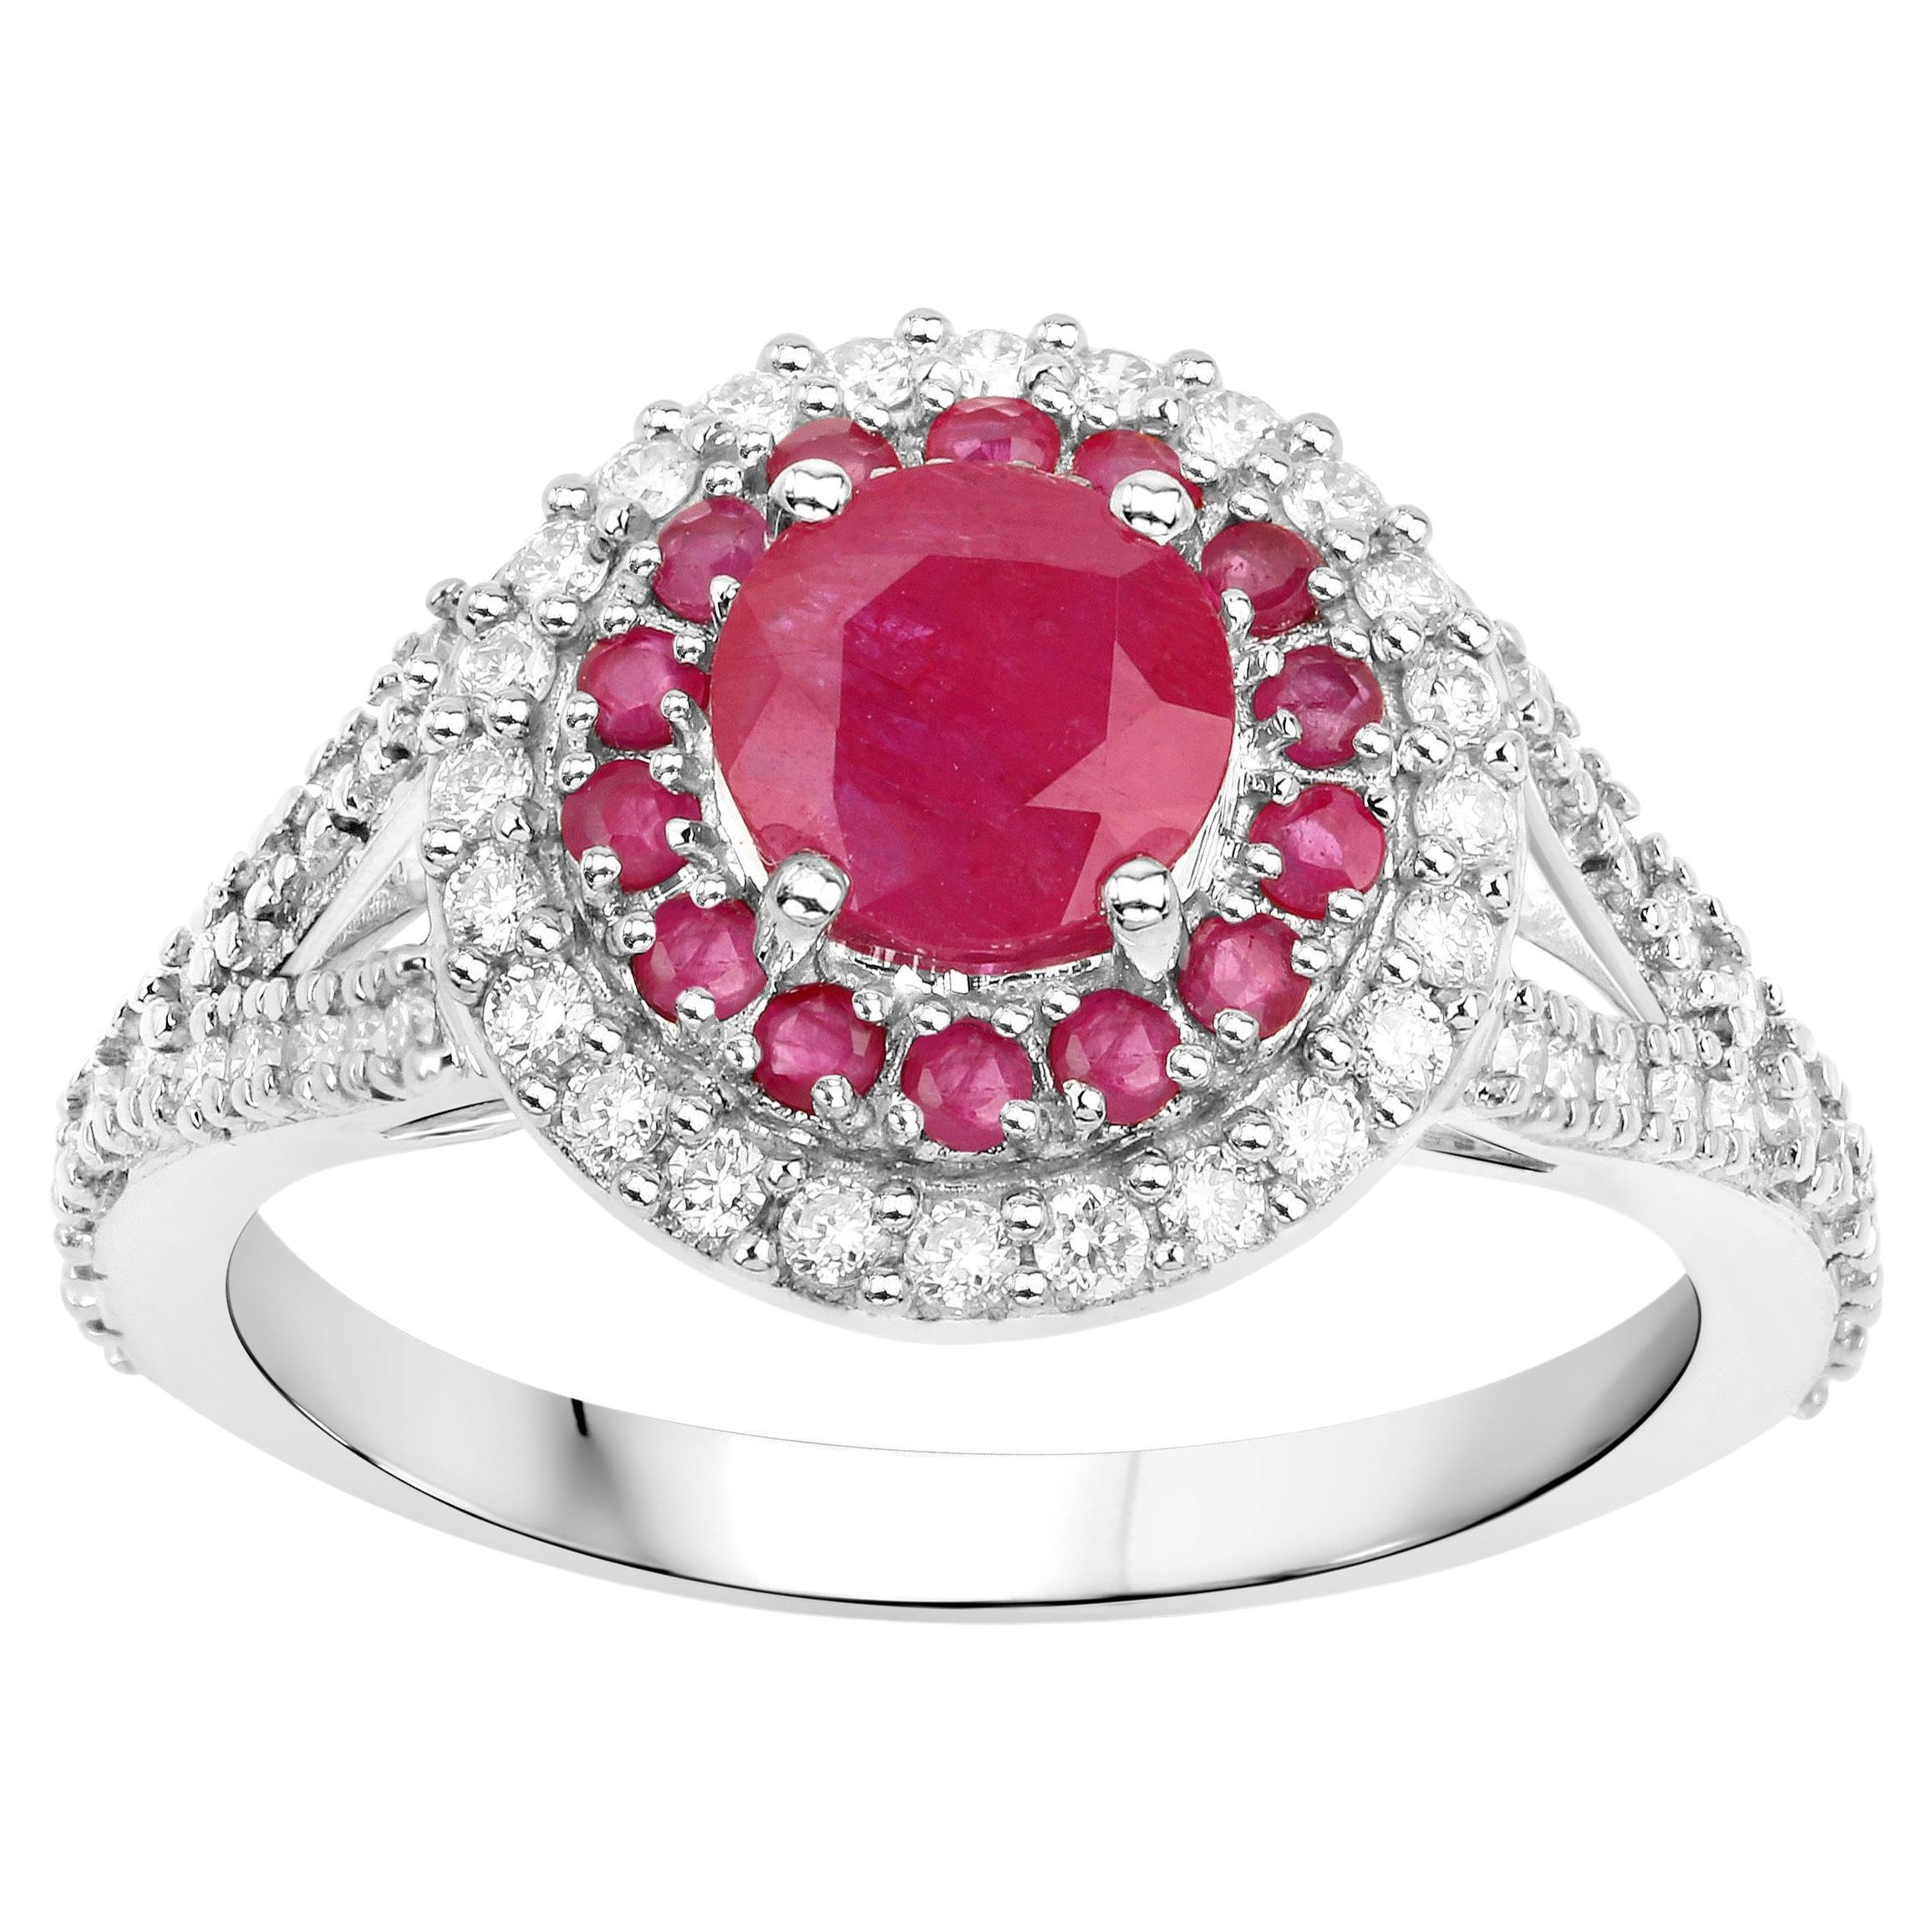 Natural Ruby Ring With Diamonds 1.95 Carats 14K White Gold For Sale